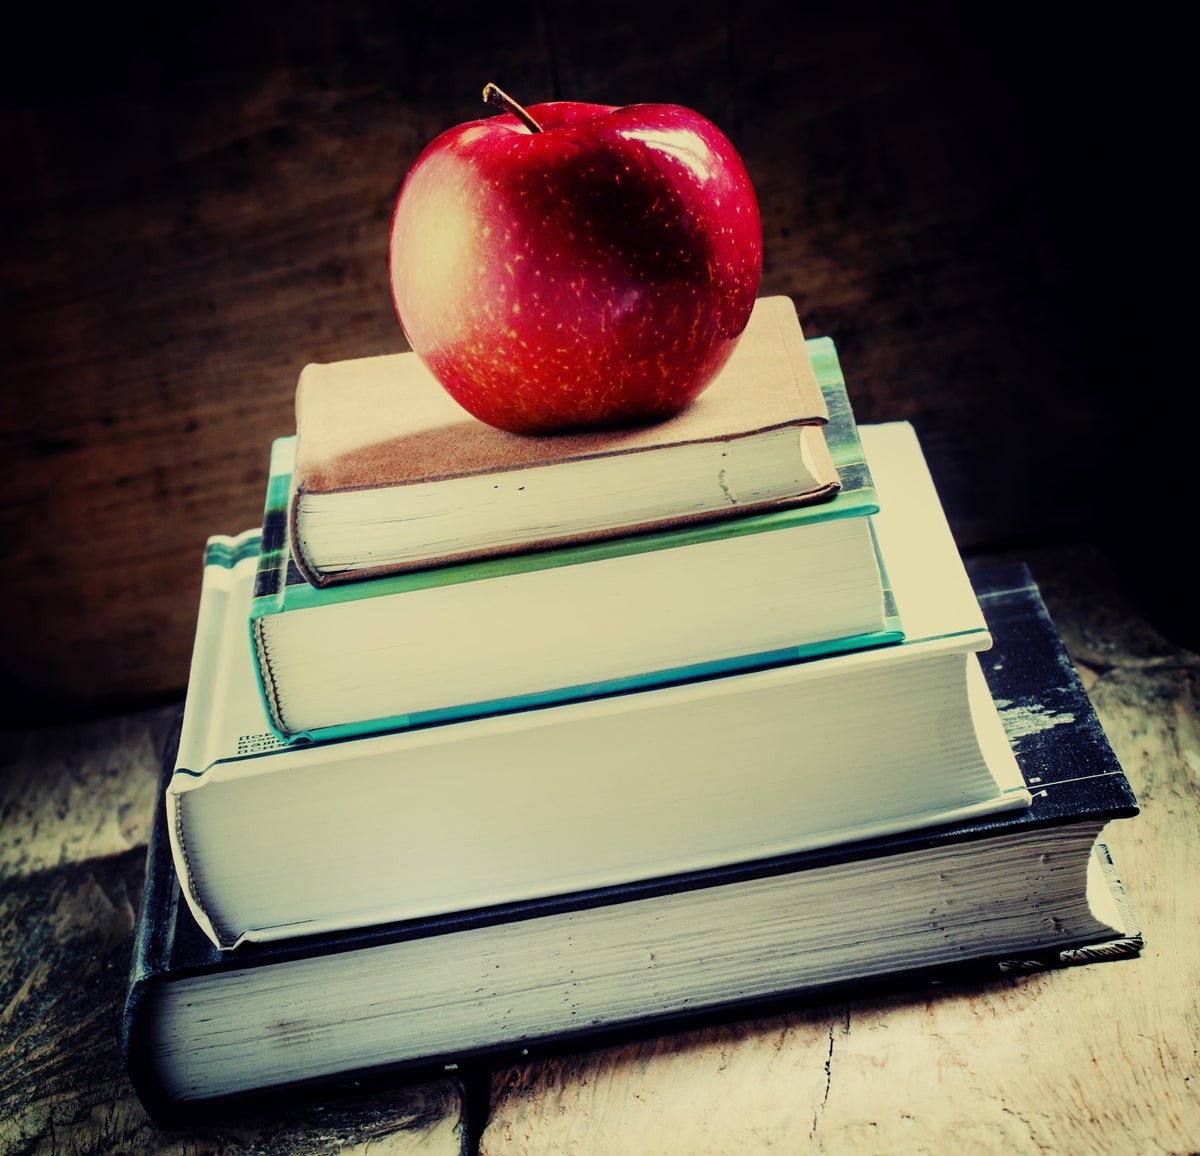 A stack of school books sits on a desk, with an apple on top. [Education/Learning]